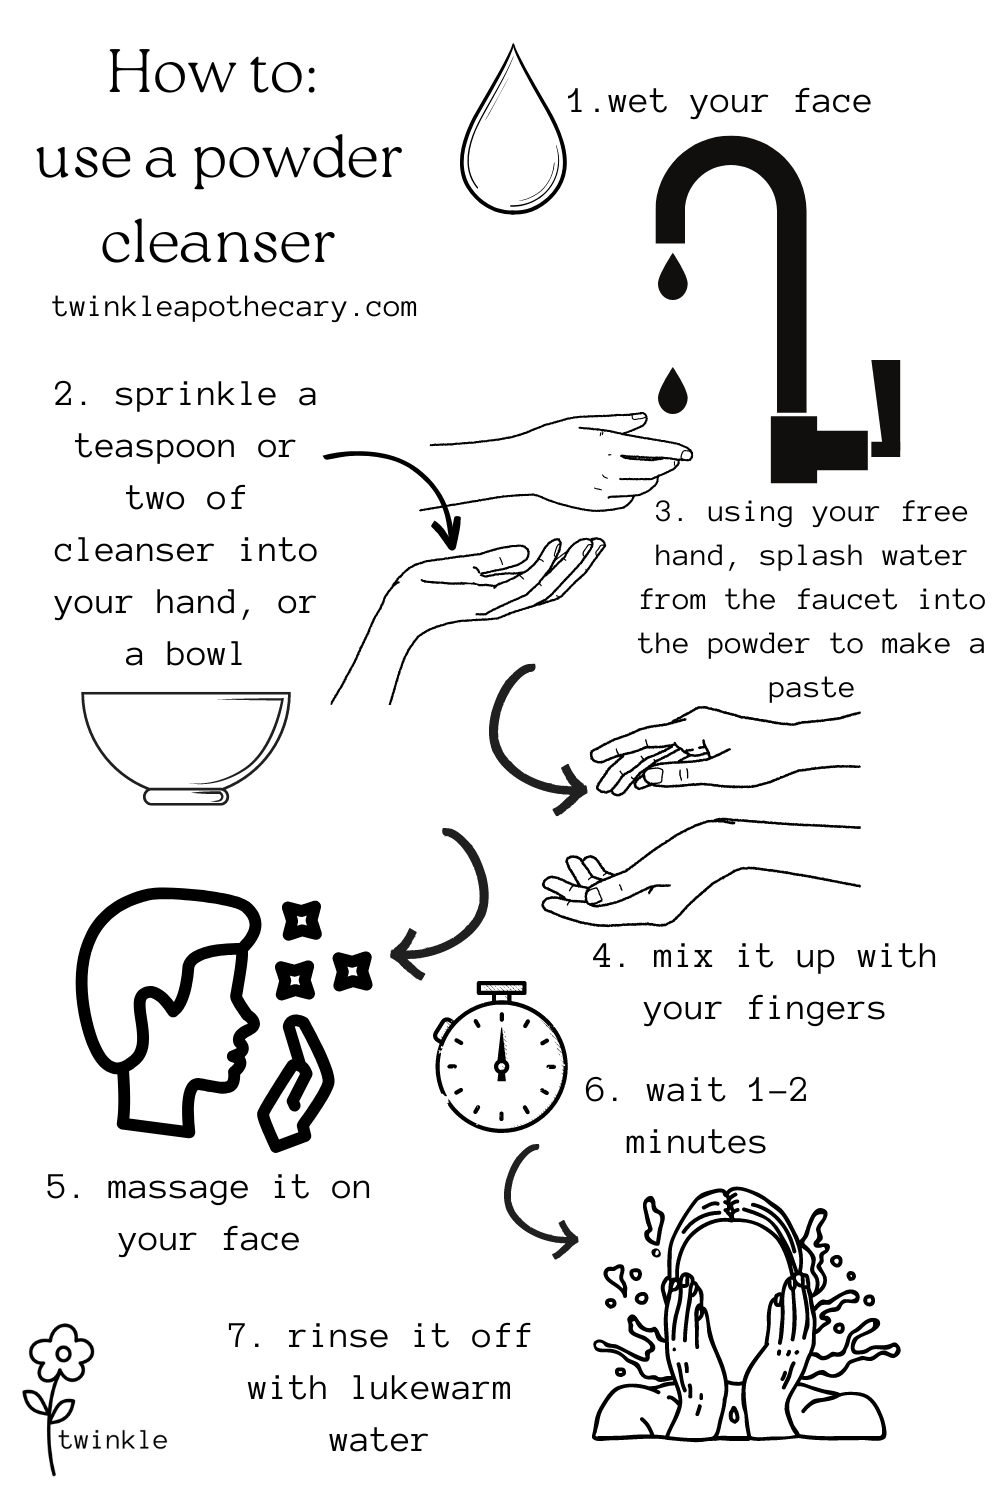 how to use a powder cleanser infographic twinkle apothecary 